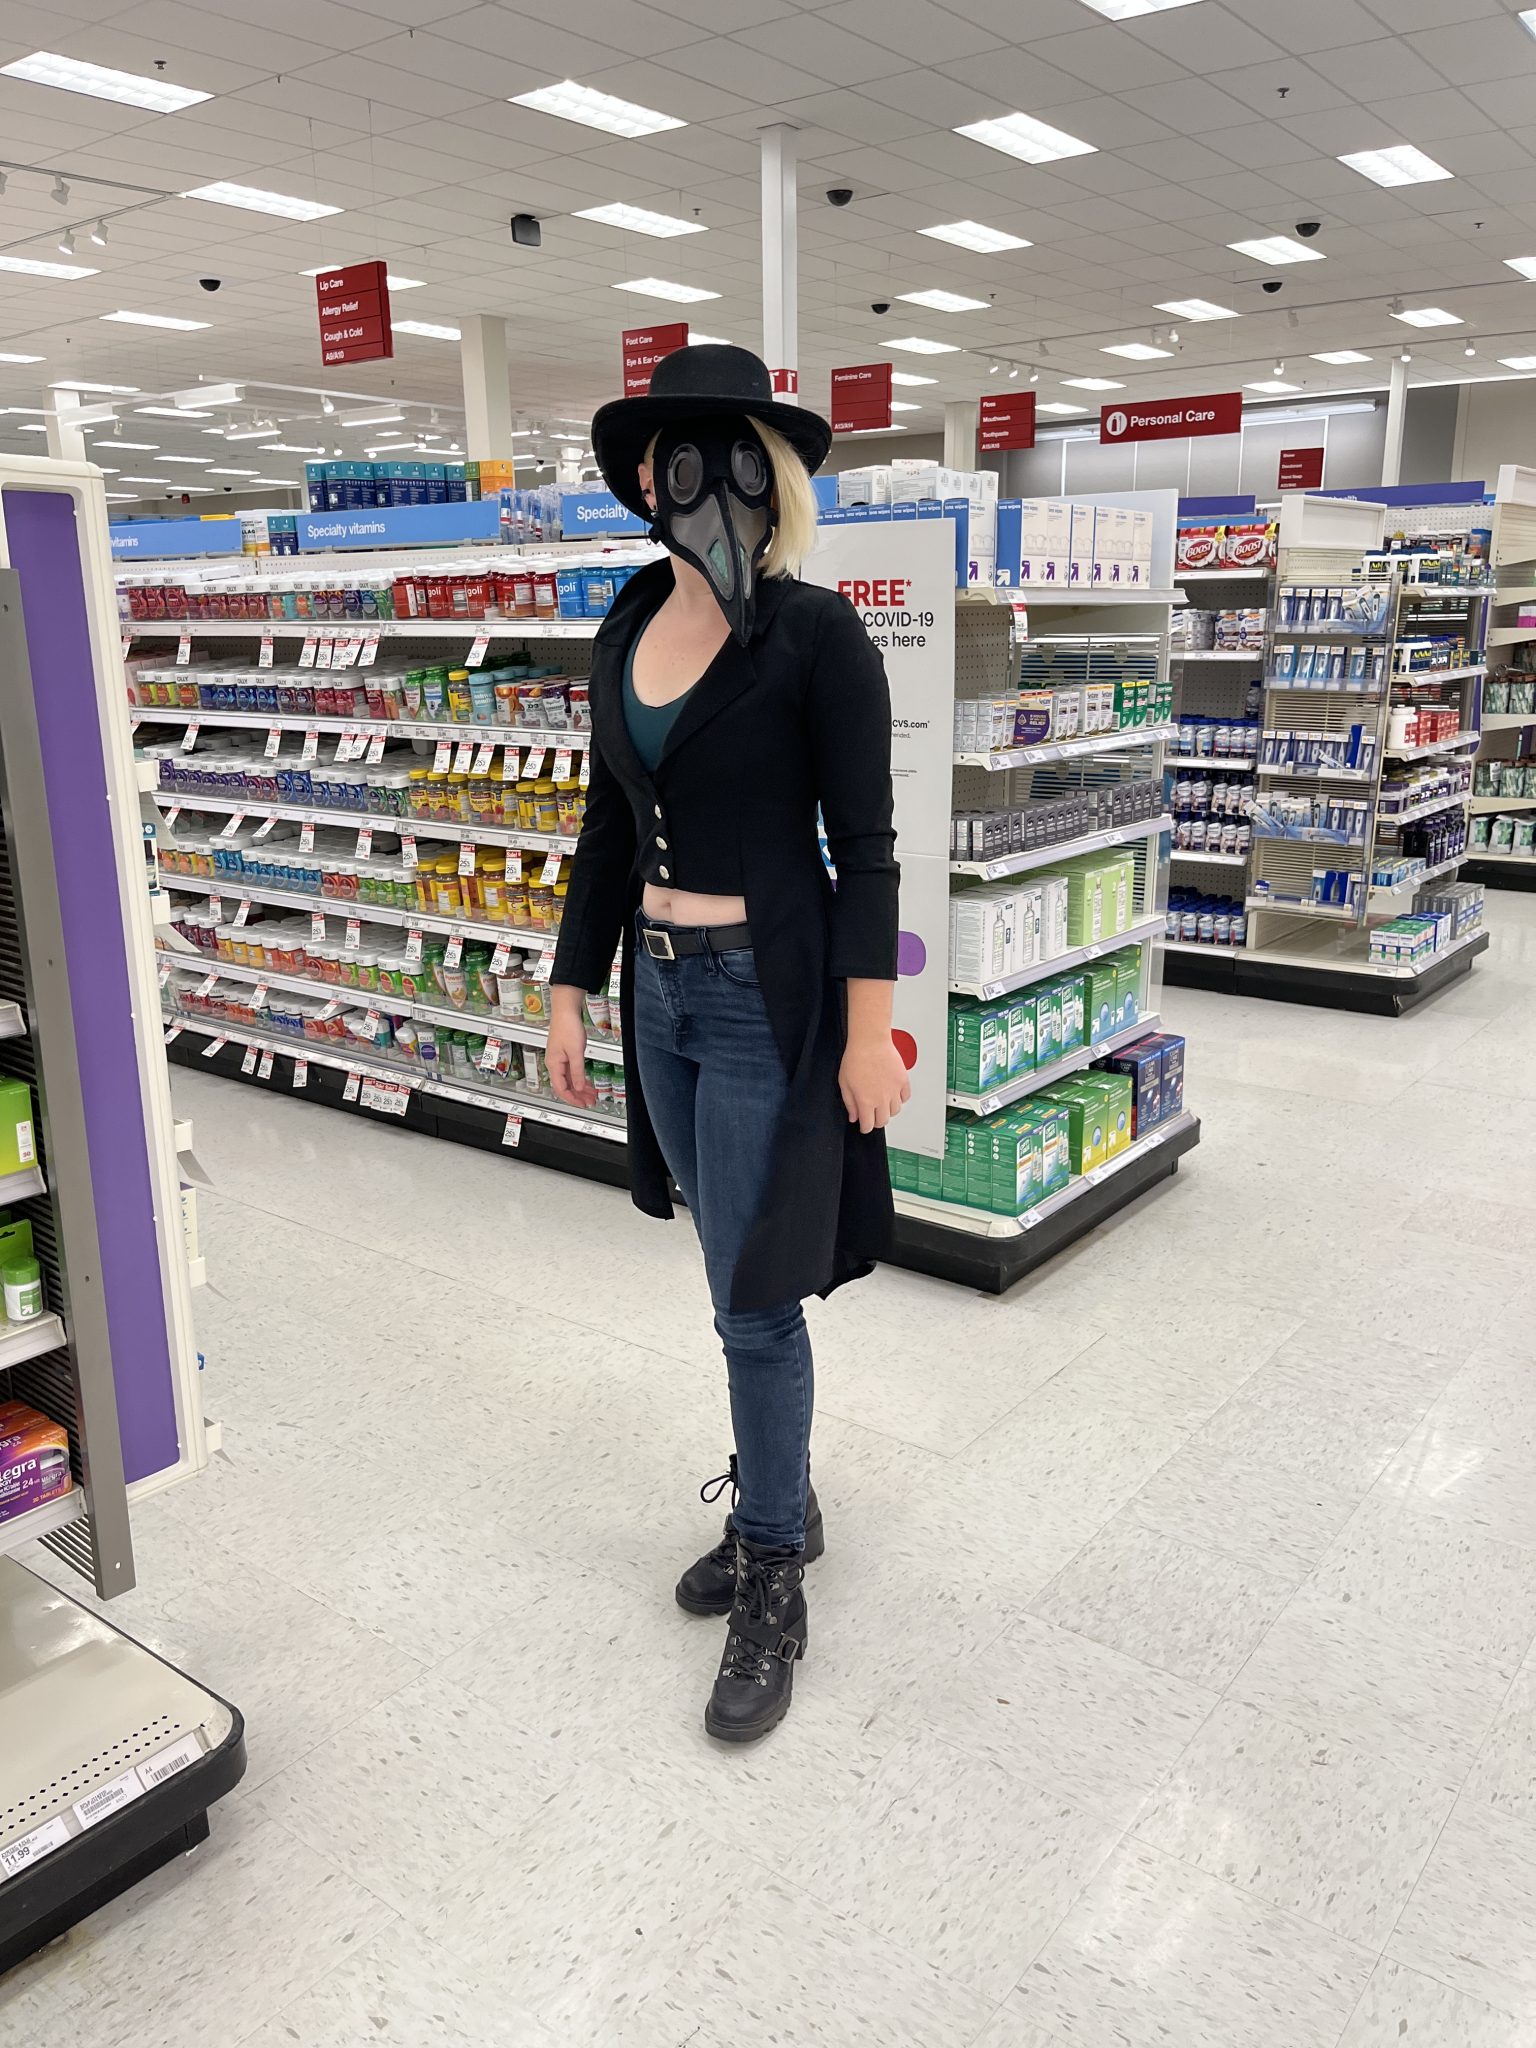 Plague doctor getting new resources at the pharmacy